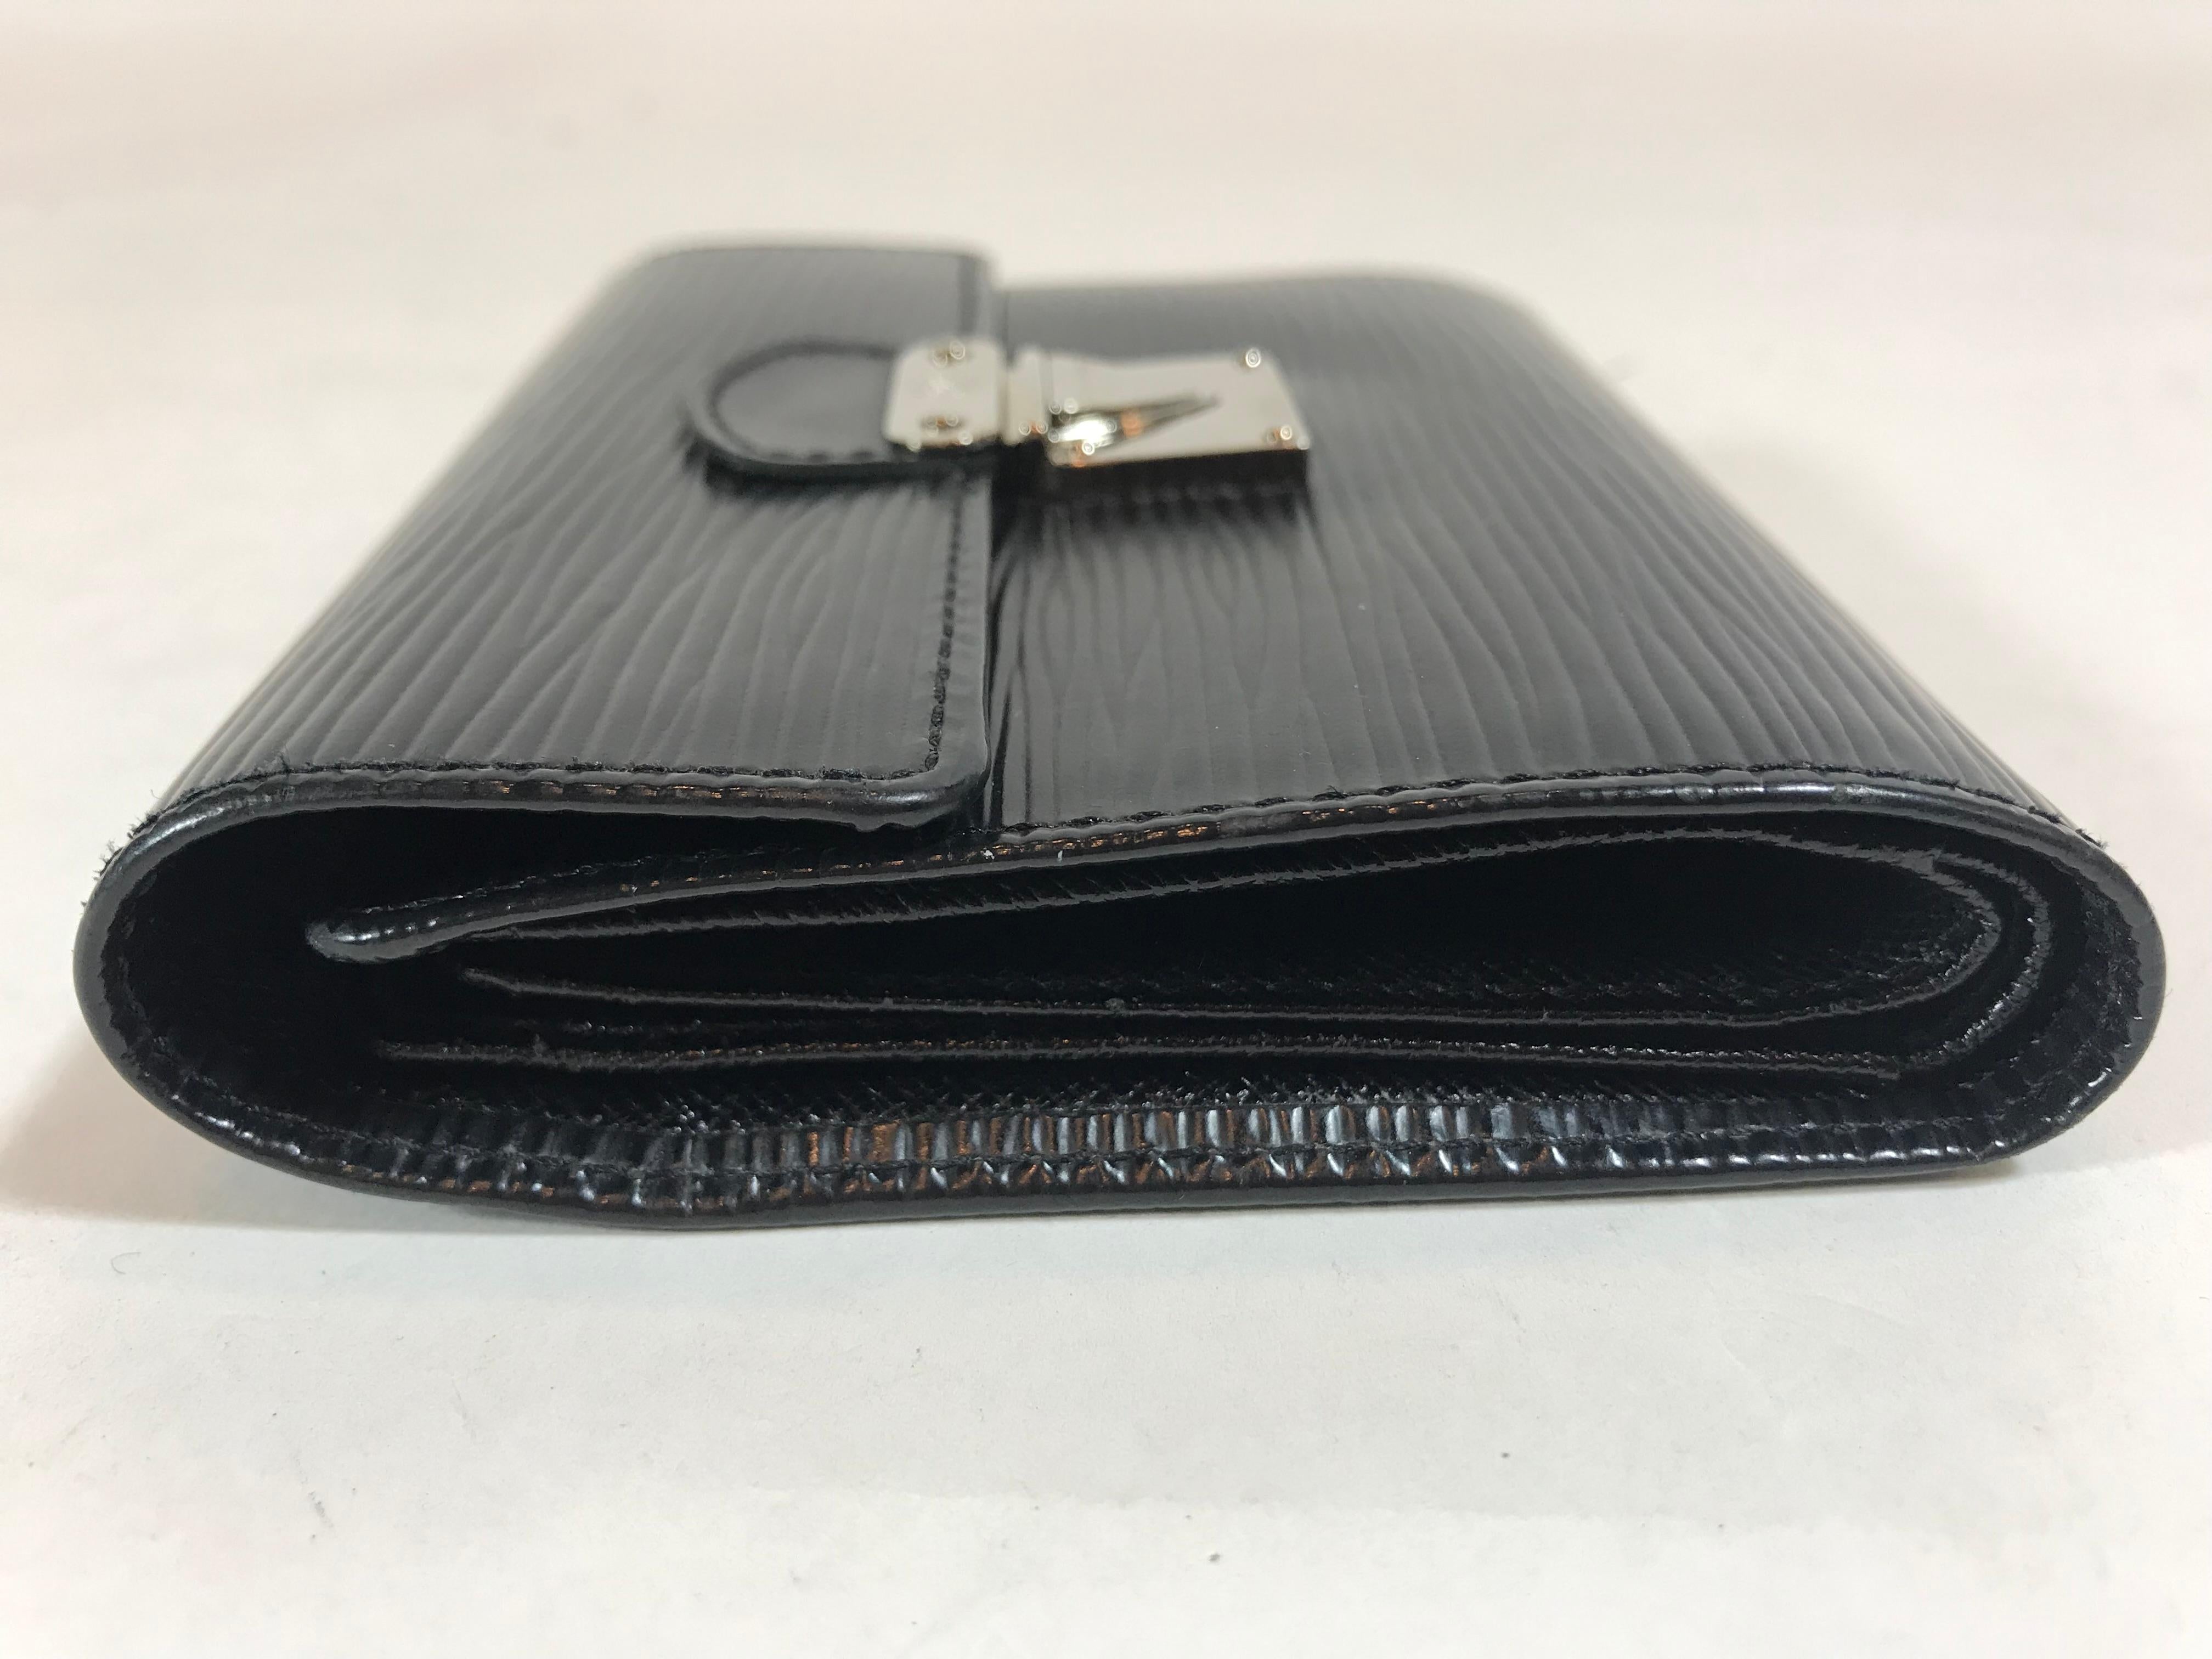 Black Epi leather. Silver-tone hardware. Push-lock closure at front. Exterior zip pocket at back. Tonal leather interior. Single bill compartment and nine card slots featuring clear ID slot.